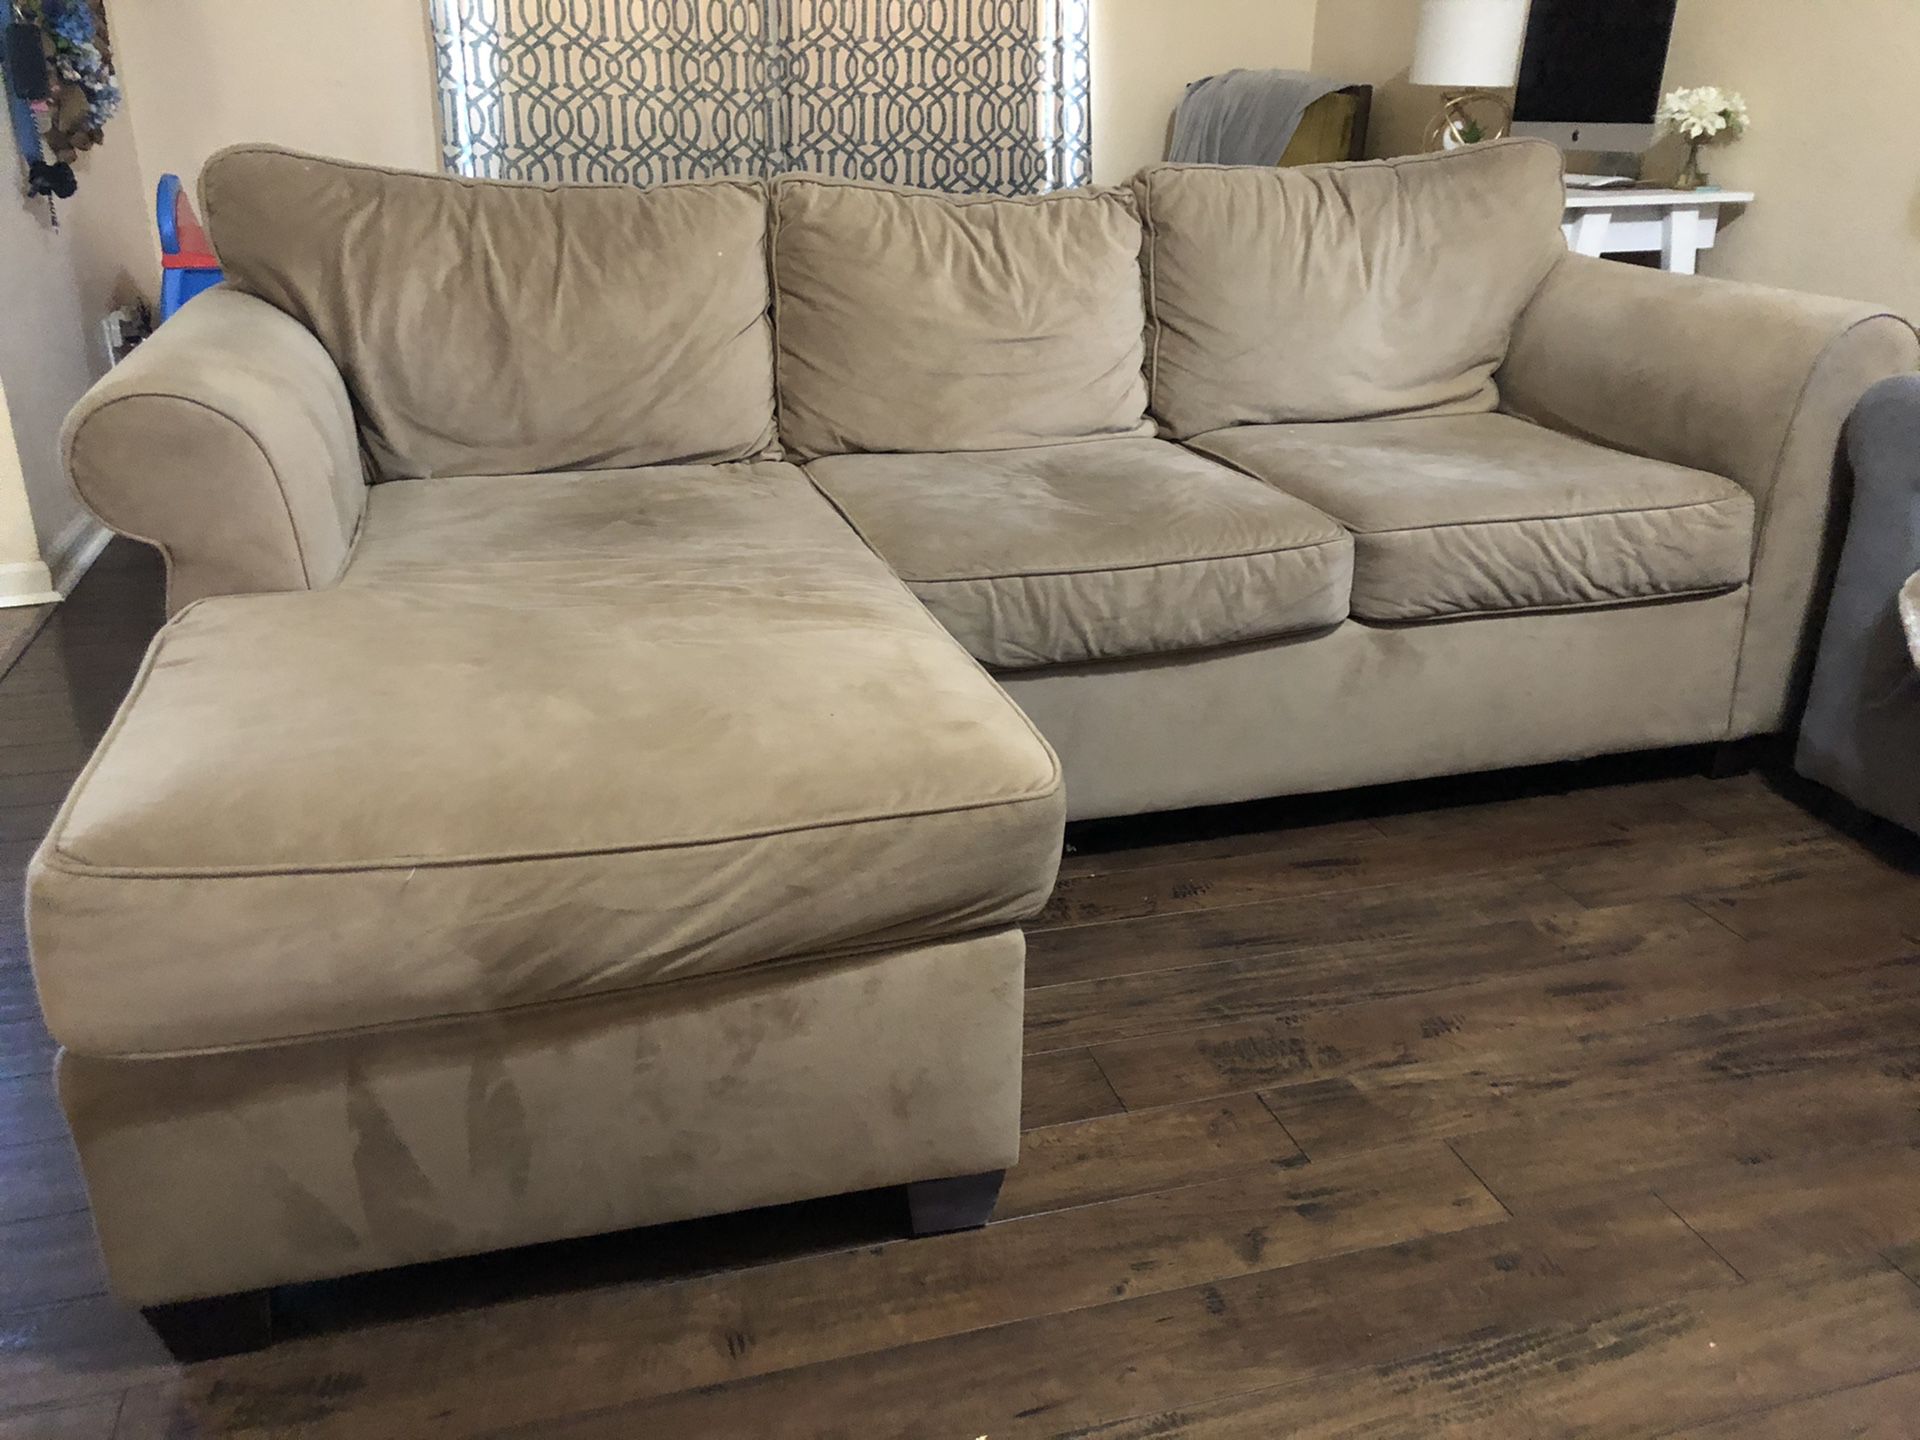 Sofas from clean, smoke free home